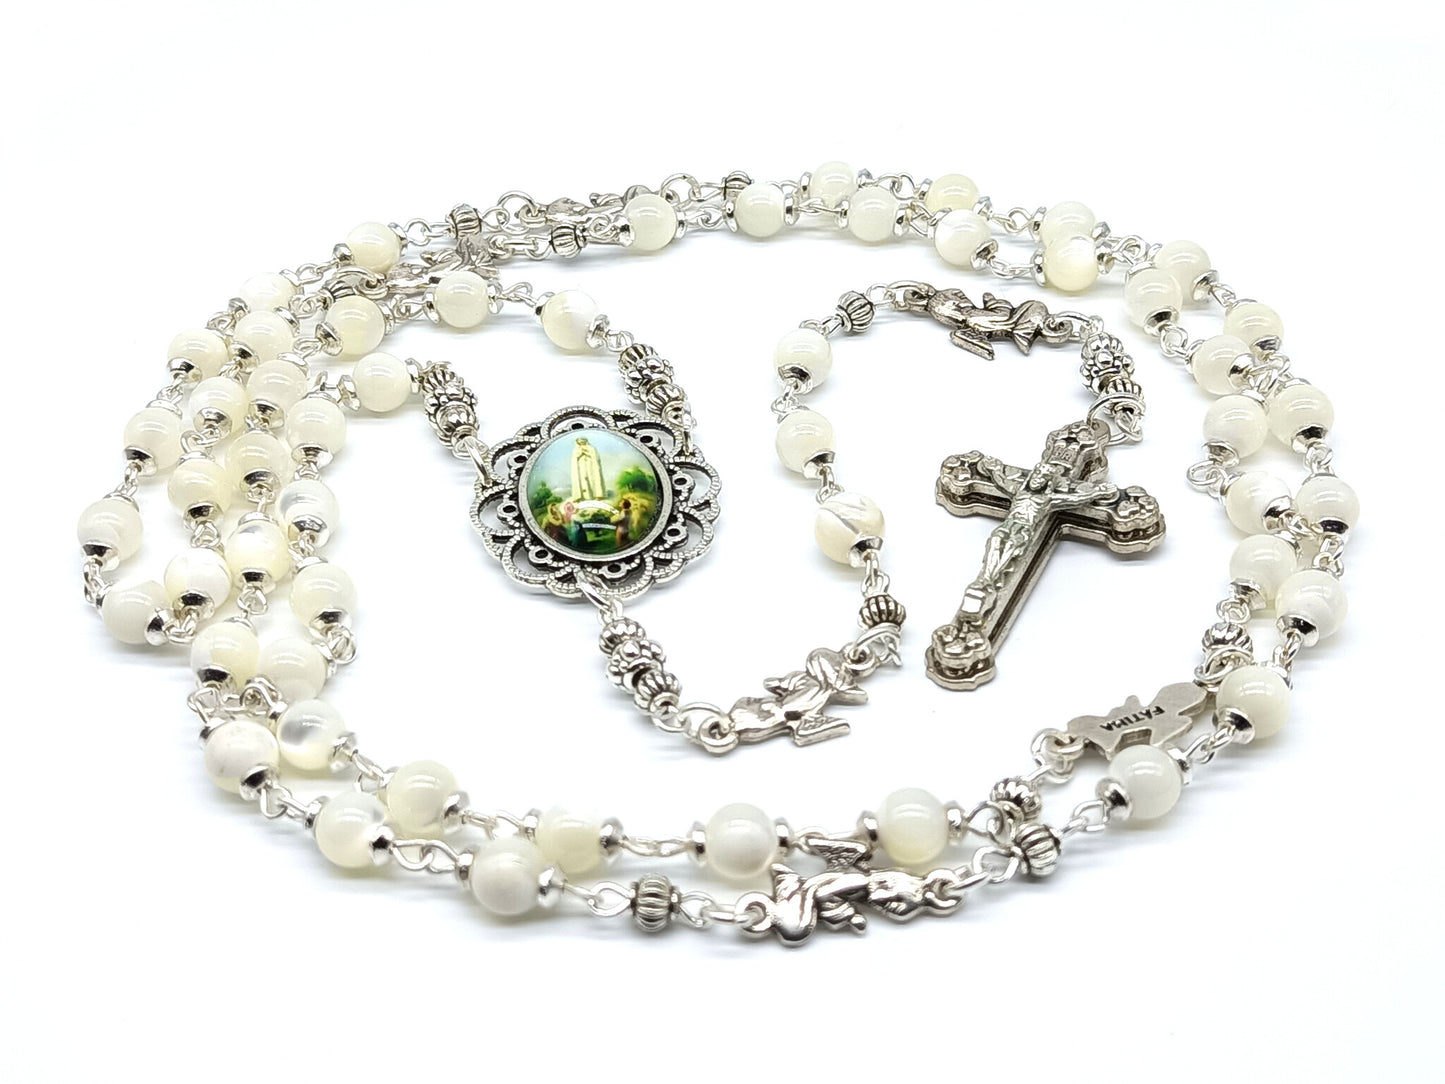 Mother of Pearl Fatima unique rosary beads with silver angel pater beads, crucifix and picture centre medal.